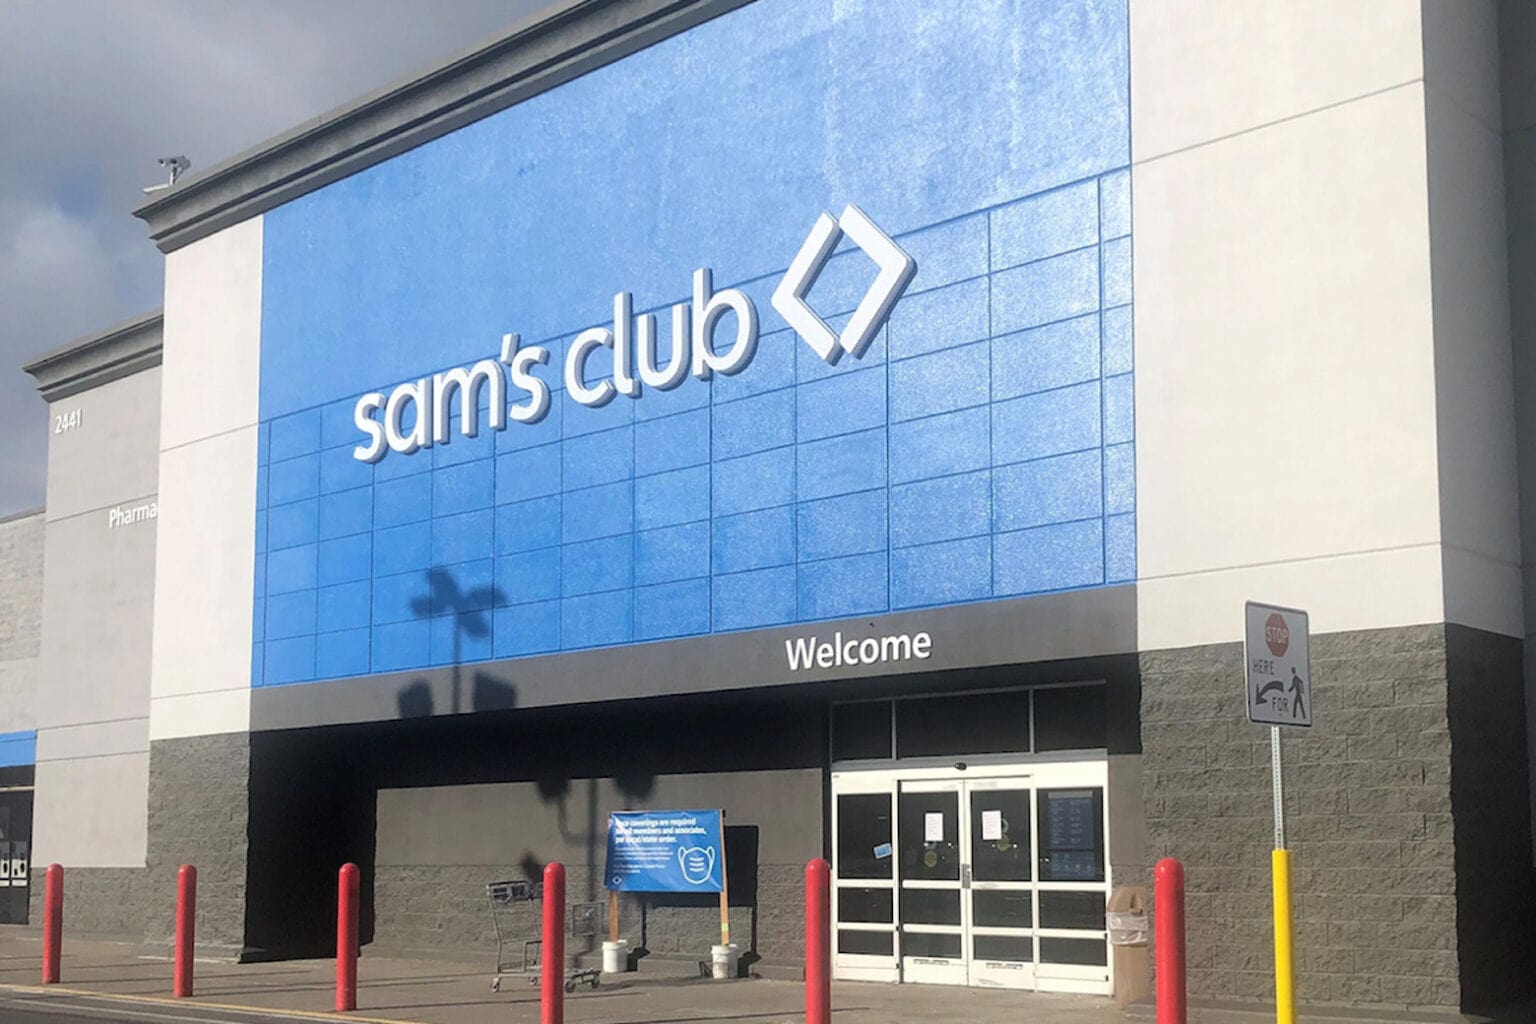 Spend only $24.99 on a 1-year membership to Sam's Club during this Back to School Sale.